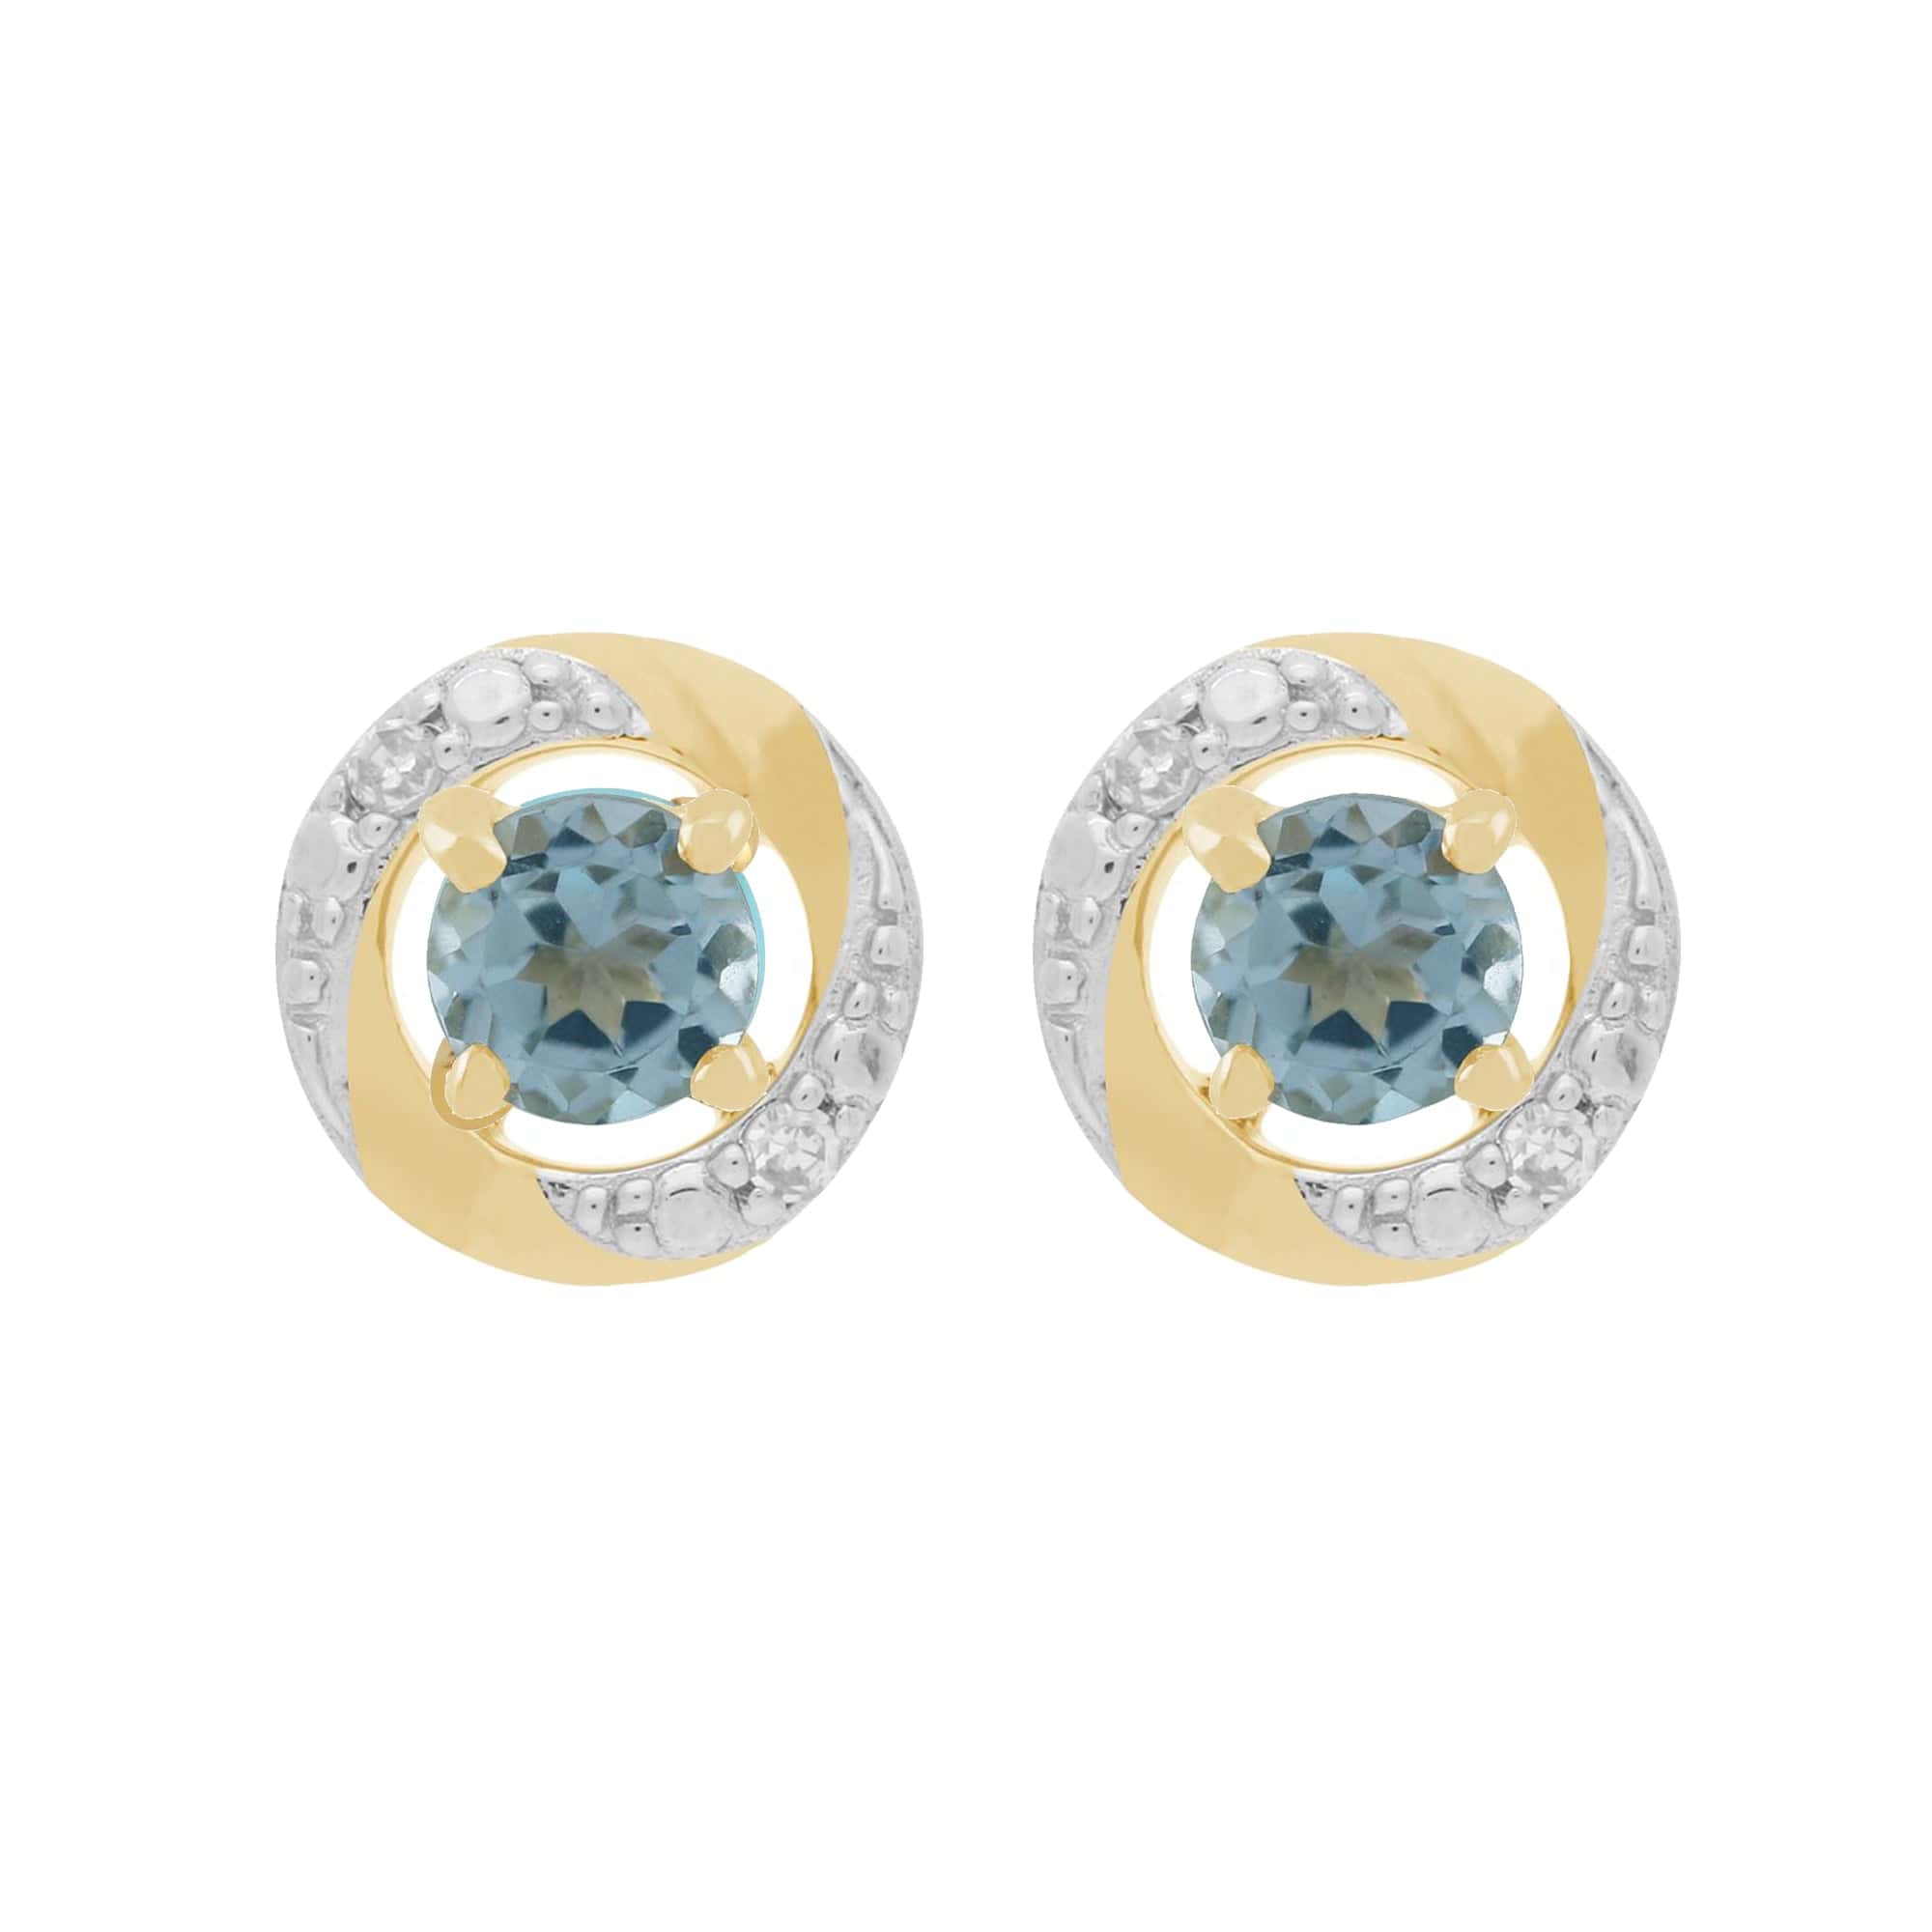 11555-191E0374019 Classic Round Blue Topaz Stud Earrings with Detachable Diamond Halo Ear Jacket in 9ct Yellow Gold 1